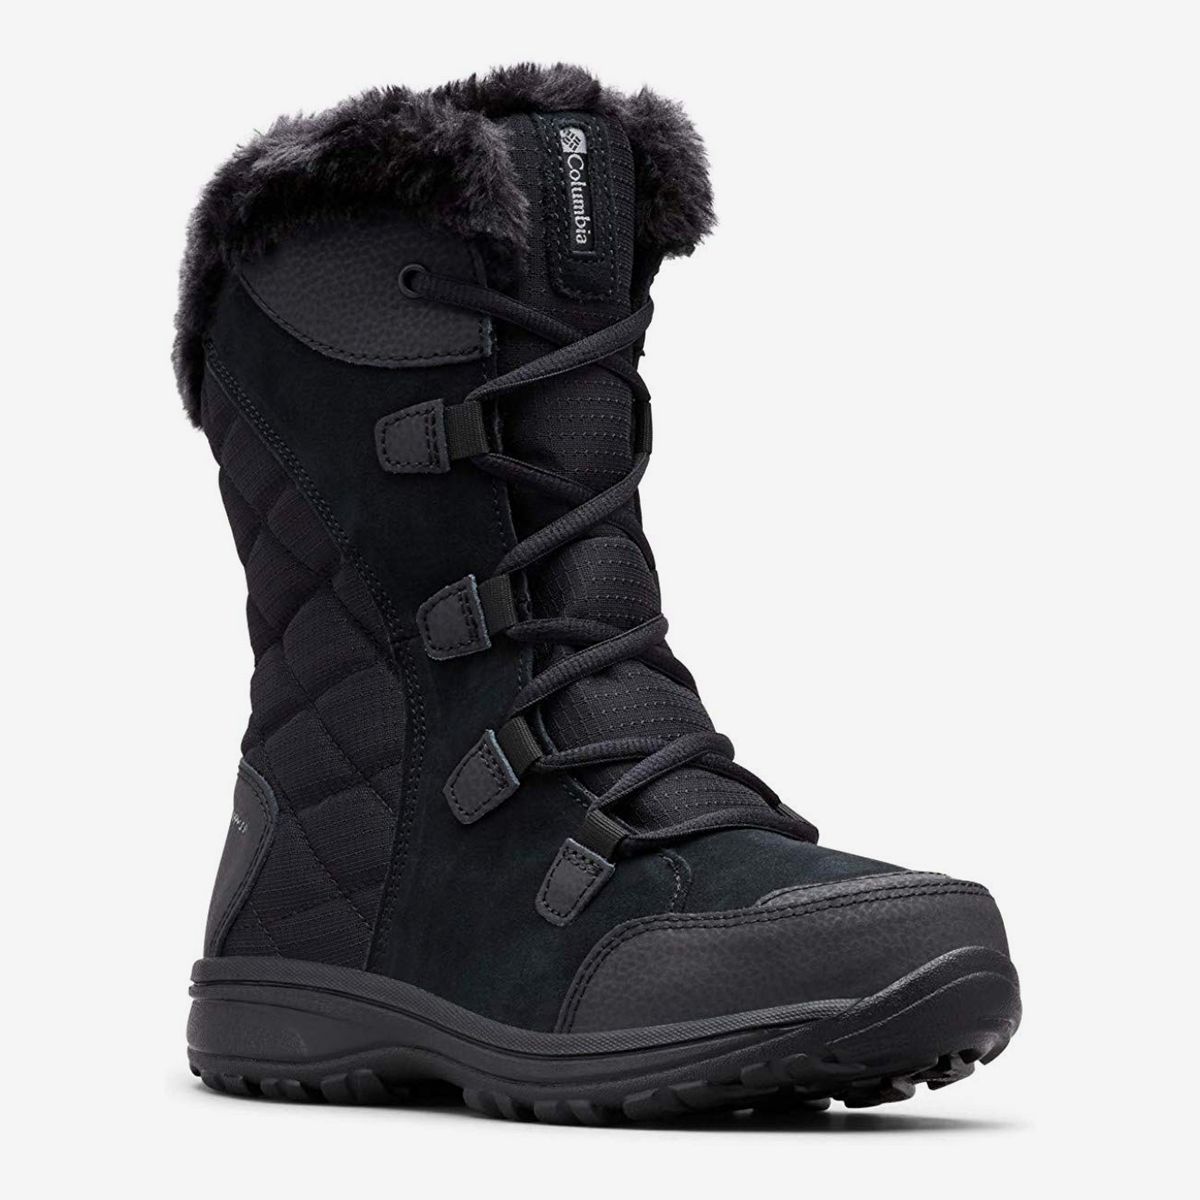 snow boots for college students